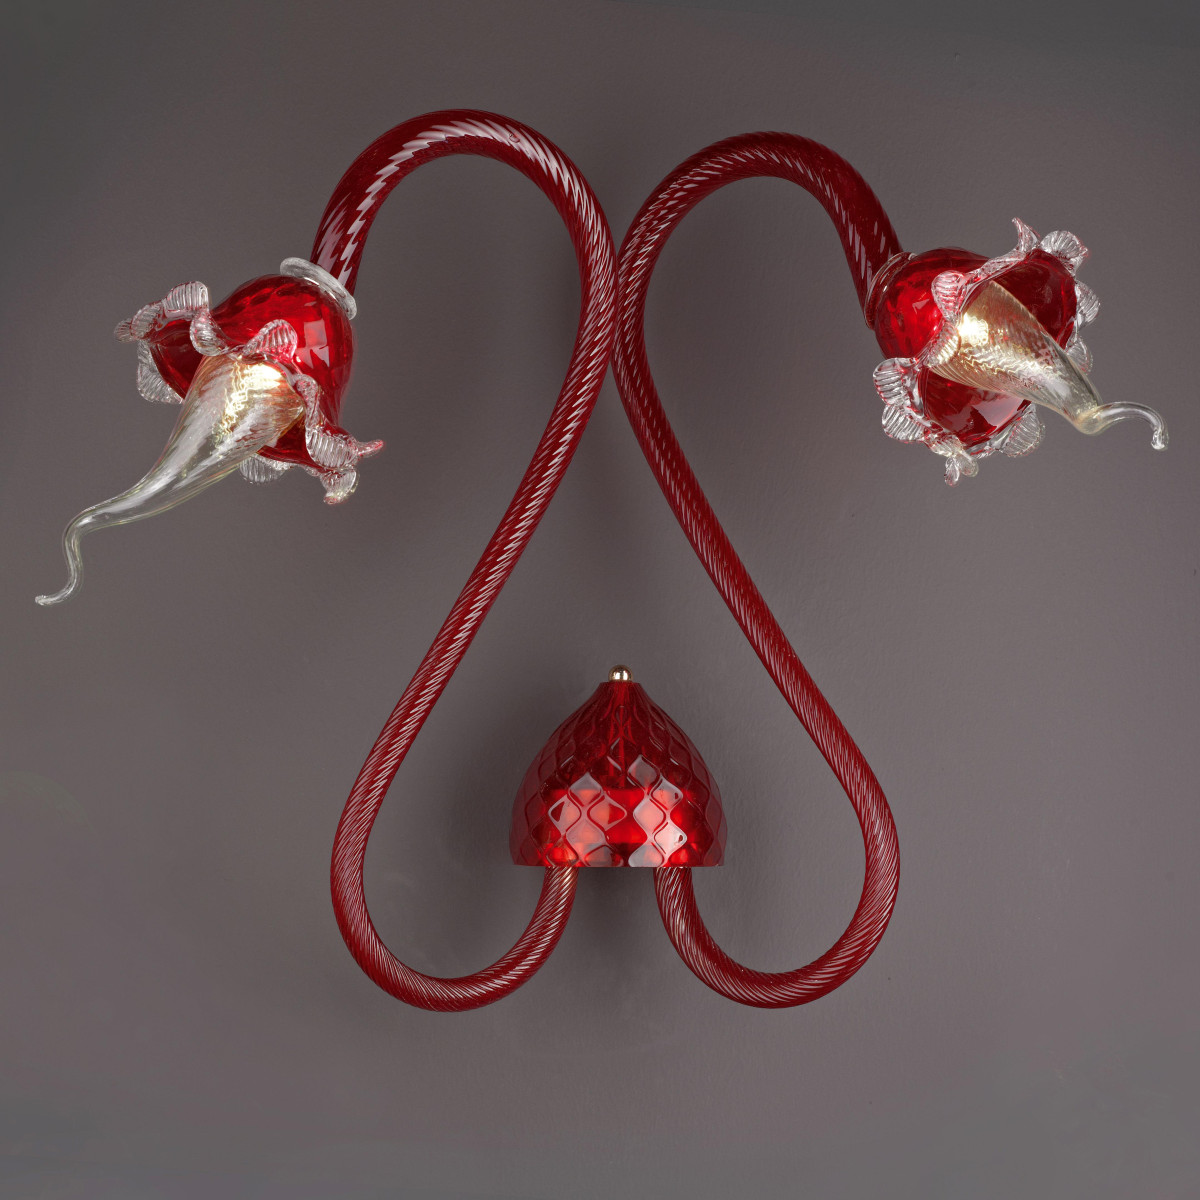 "Edera" Murano glass chandelier - red and transparent -